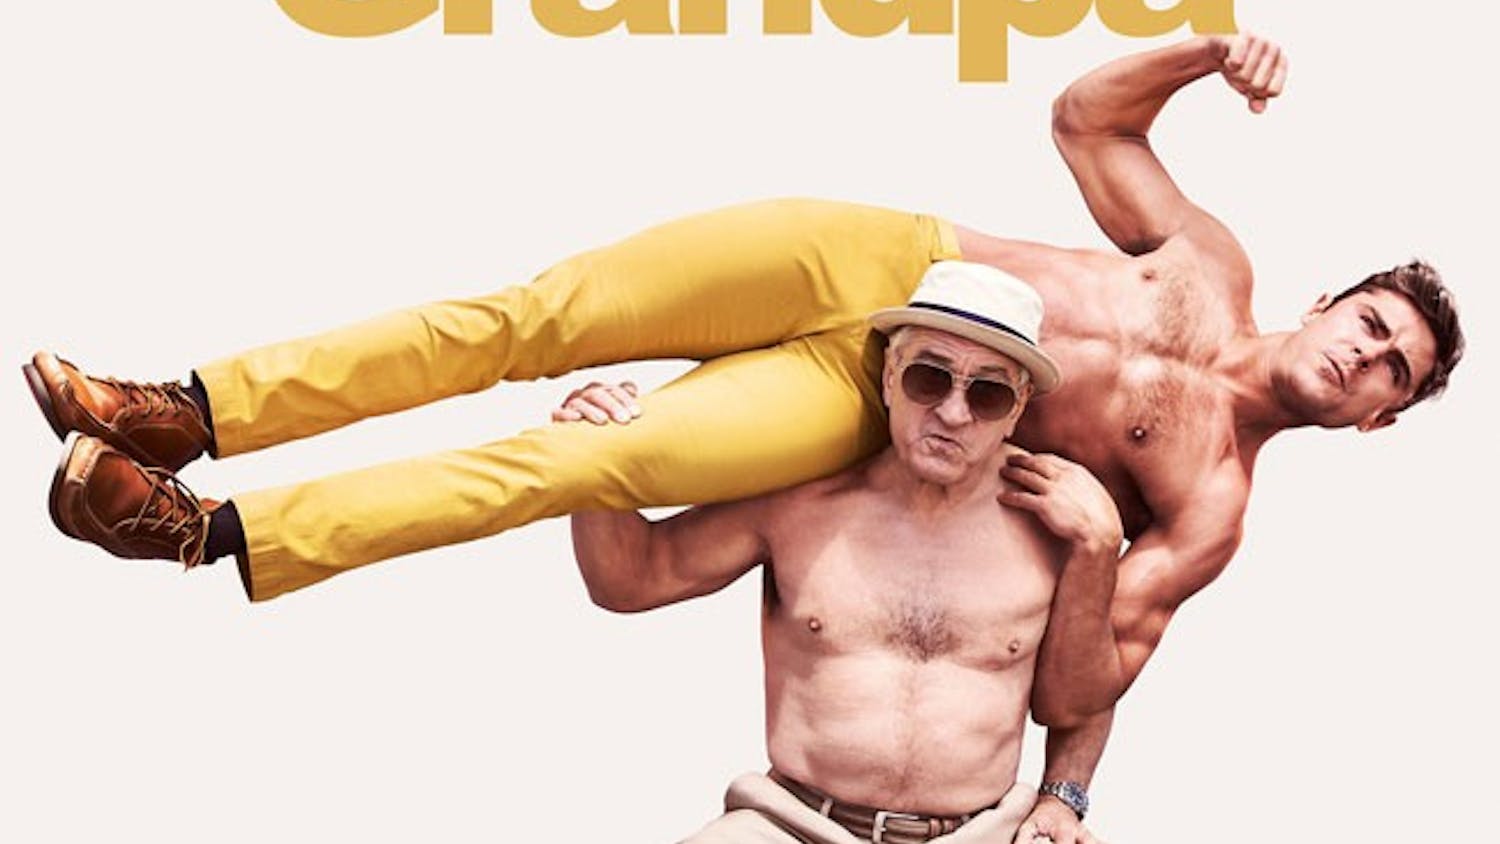 Robert De Niro and Zac Efron battle it out in "Dirty Grandpa," a raunchy comedy about a grandson and grandfather&nbsp;who take a road trip together to Daytona Beach.